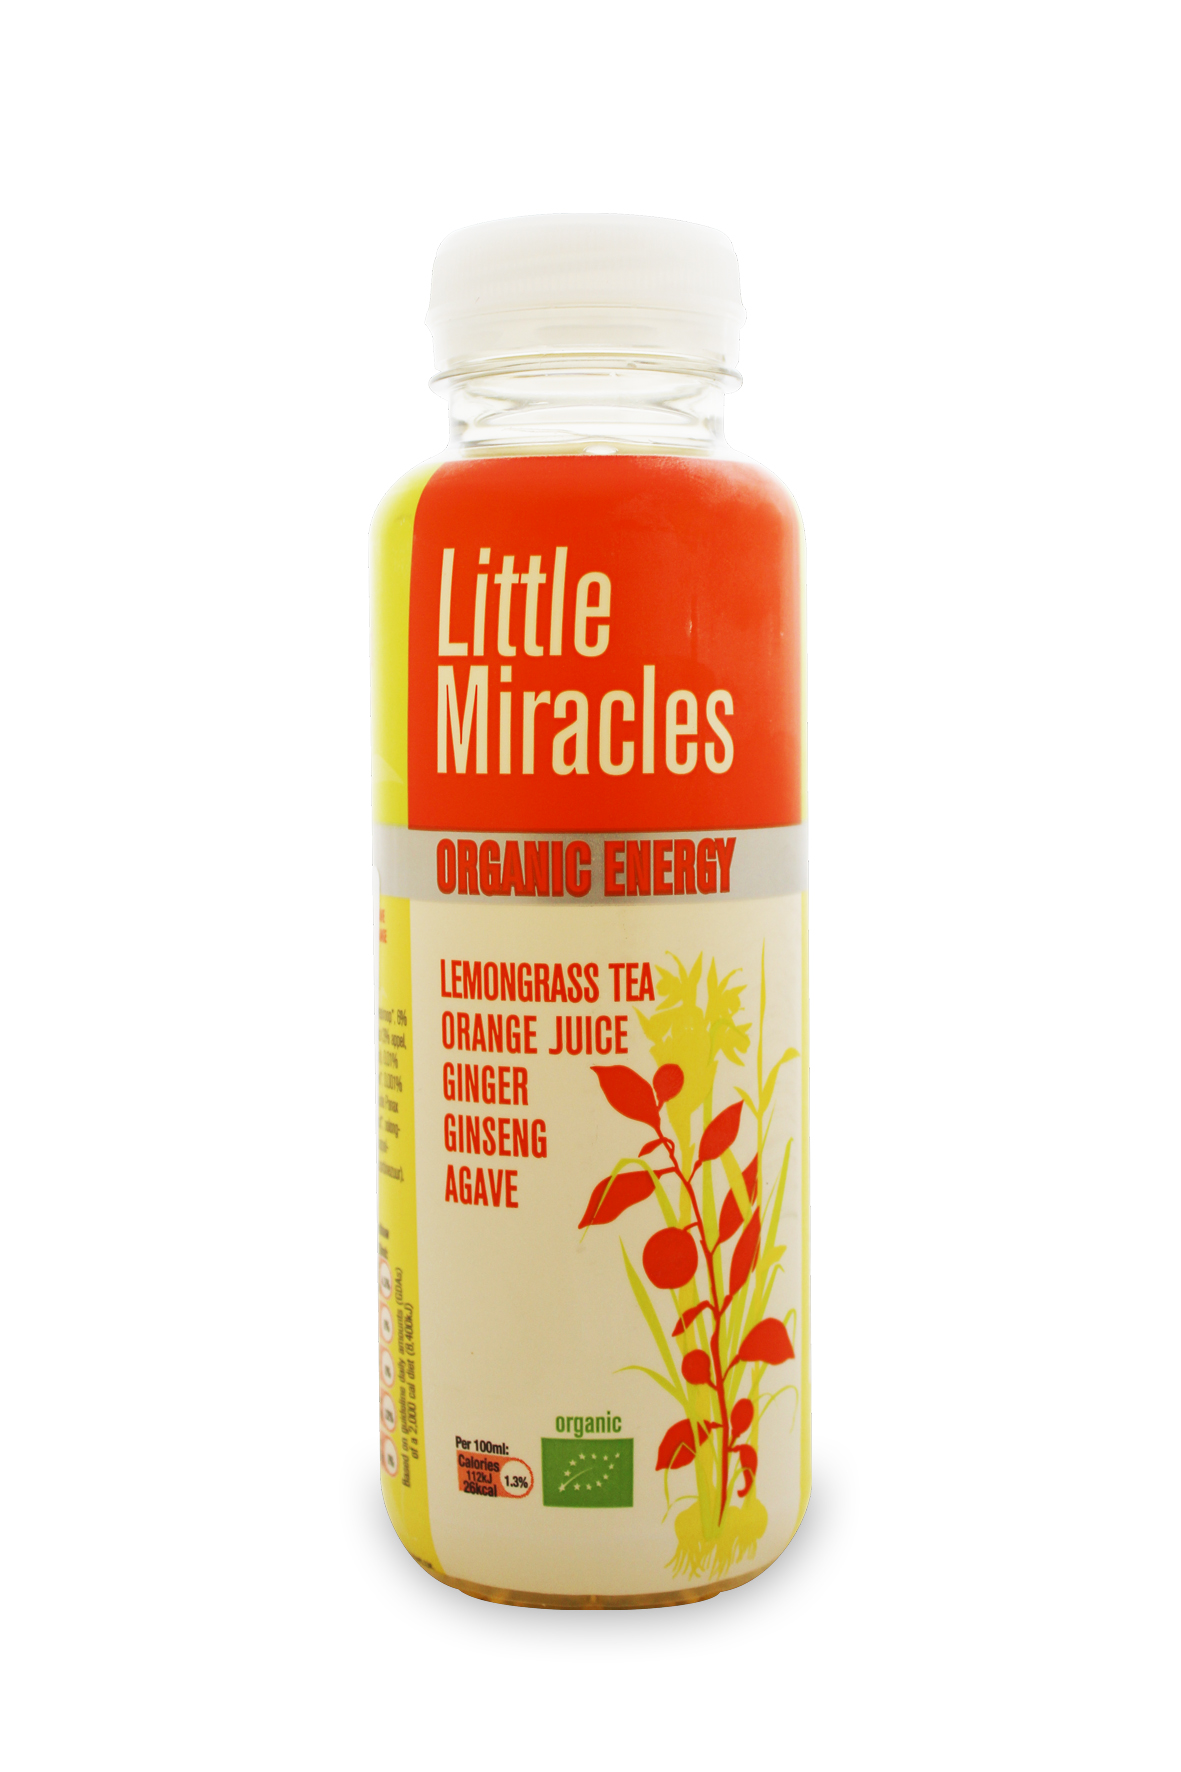 Little Miracles BIO energy drink flavored with lemon grass, orange juice, ginger, ginseng